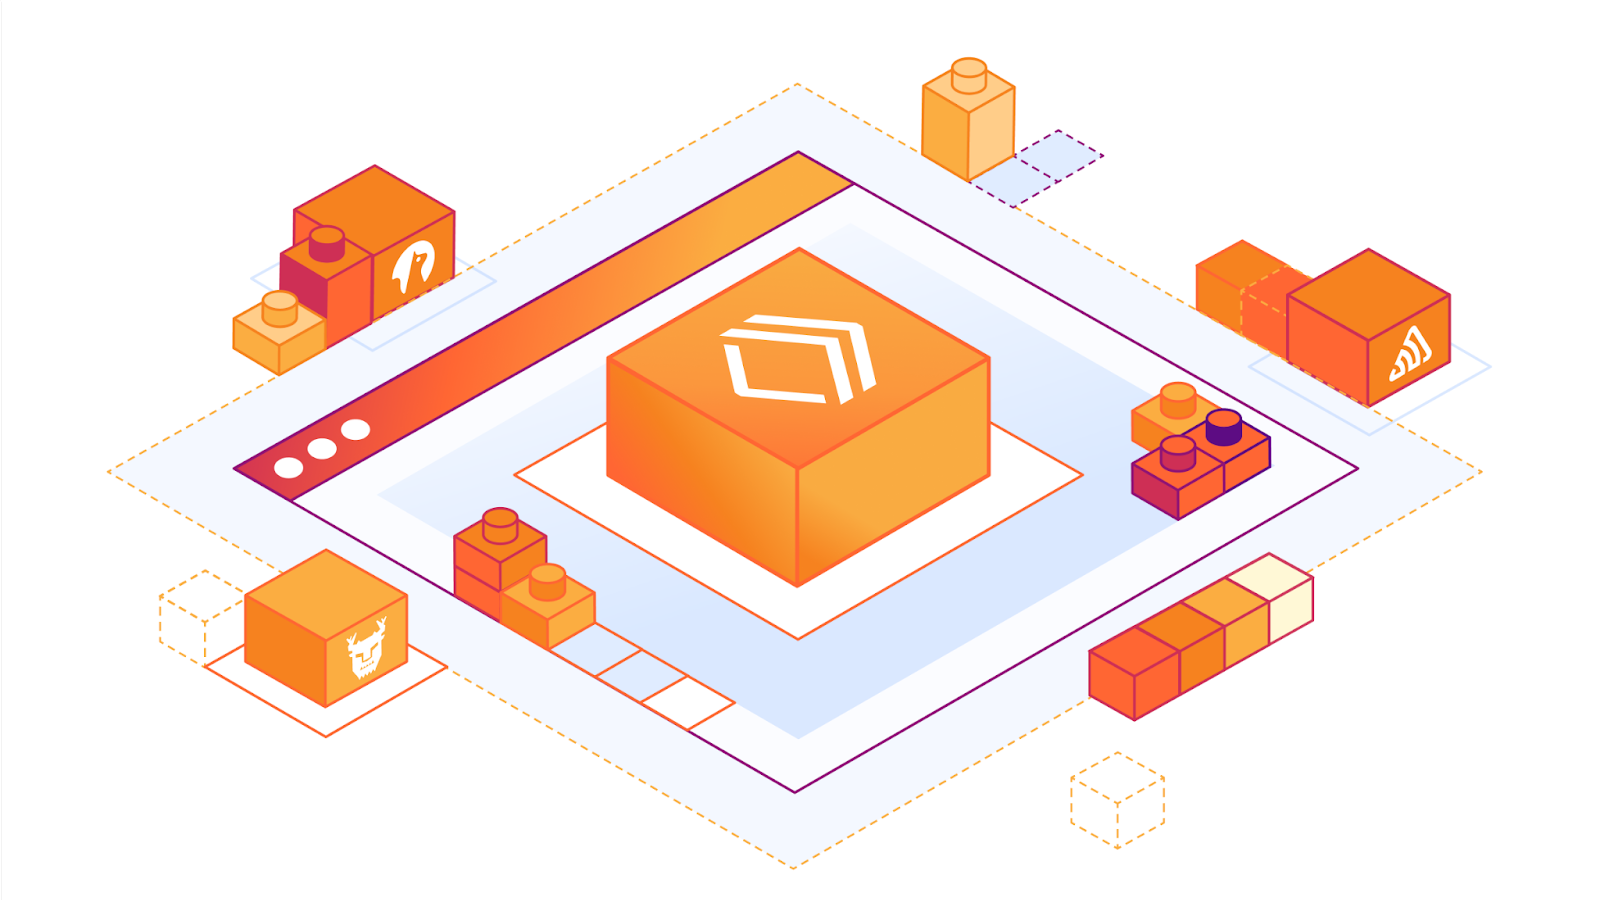 Cloudflare Integrations Marketplace introduces three new partners: Sentry, Momento and Turso